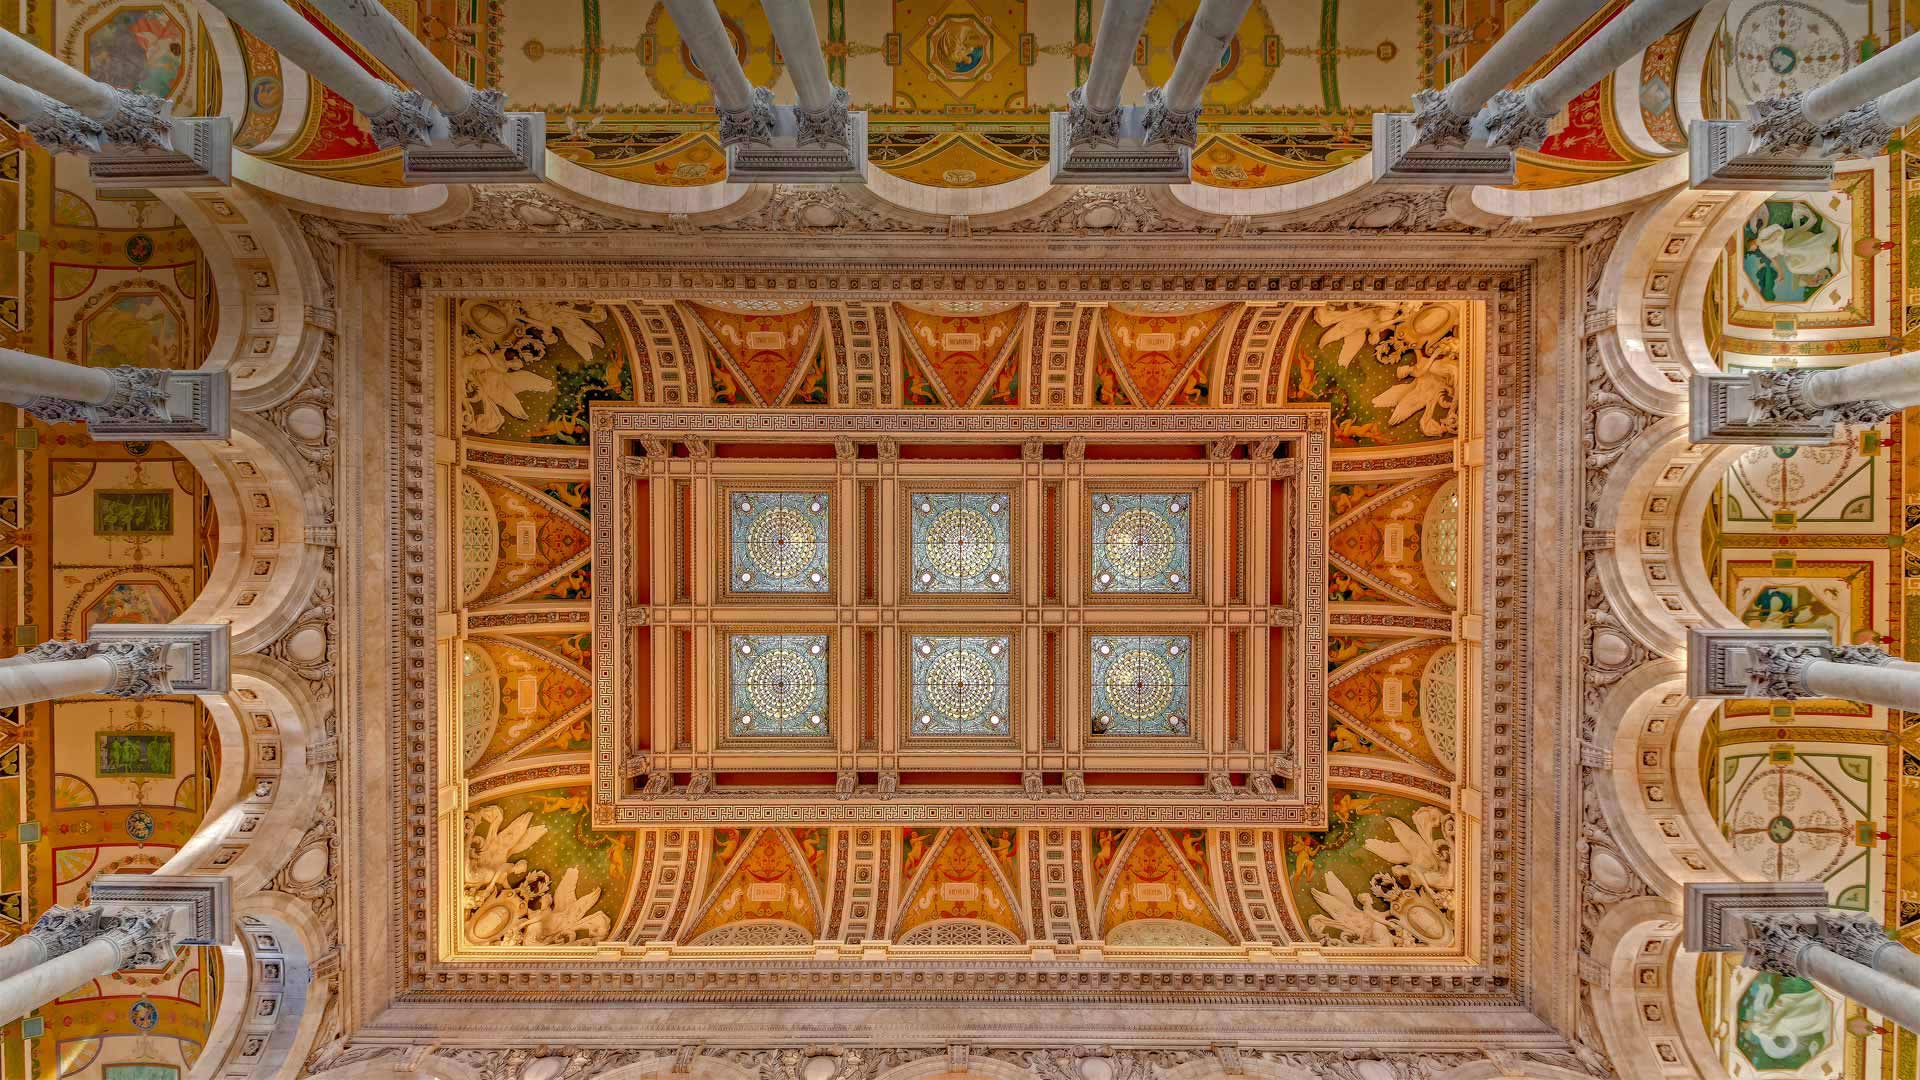 Ceiling and cove of the Great Hall at the Library of Congress in Washington, DC - Susan Candelario/Alamy)